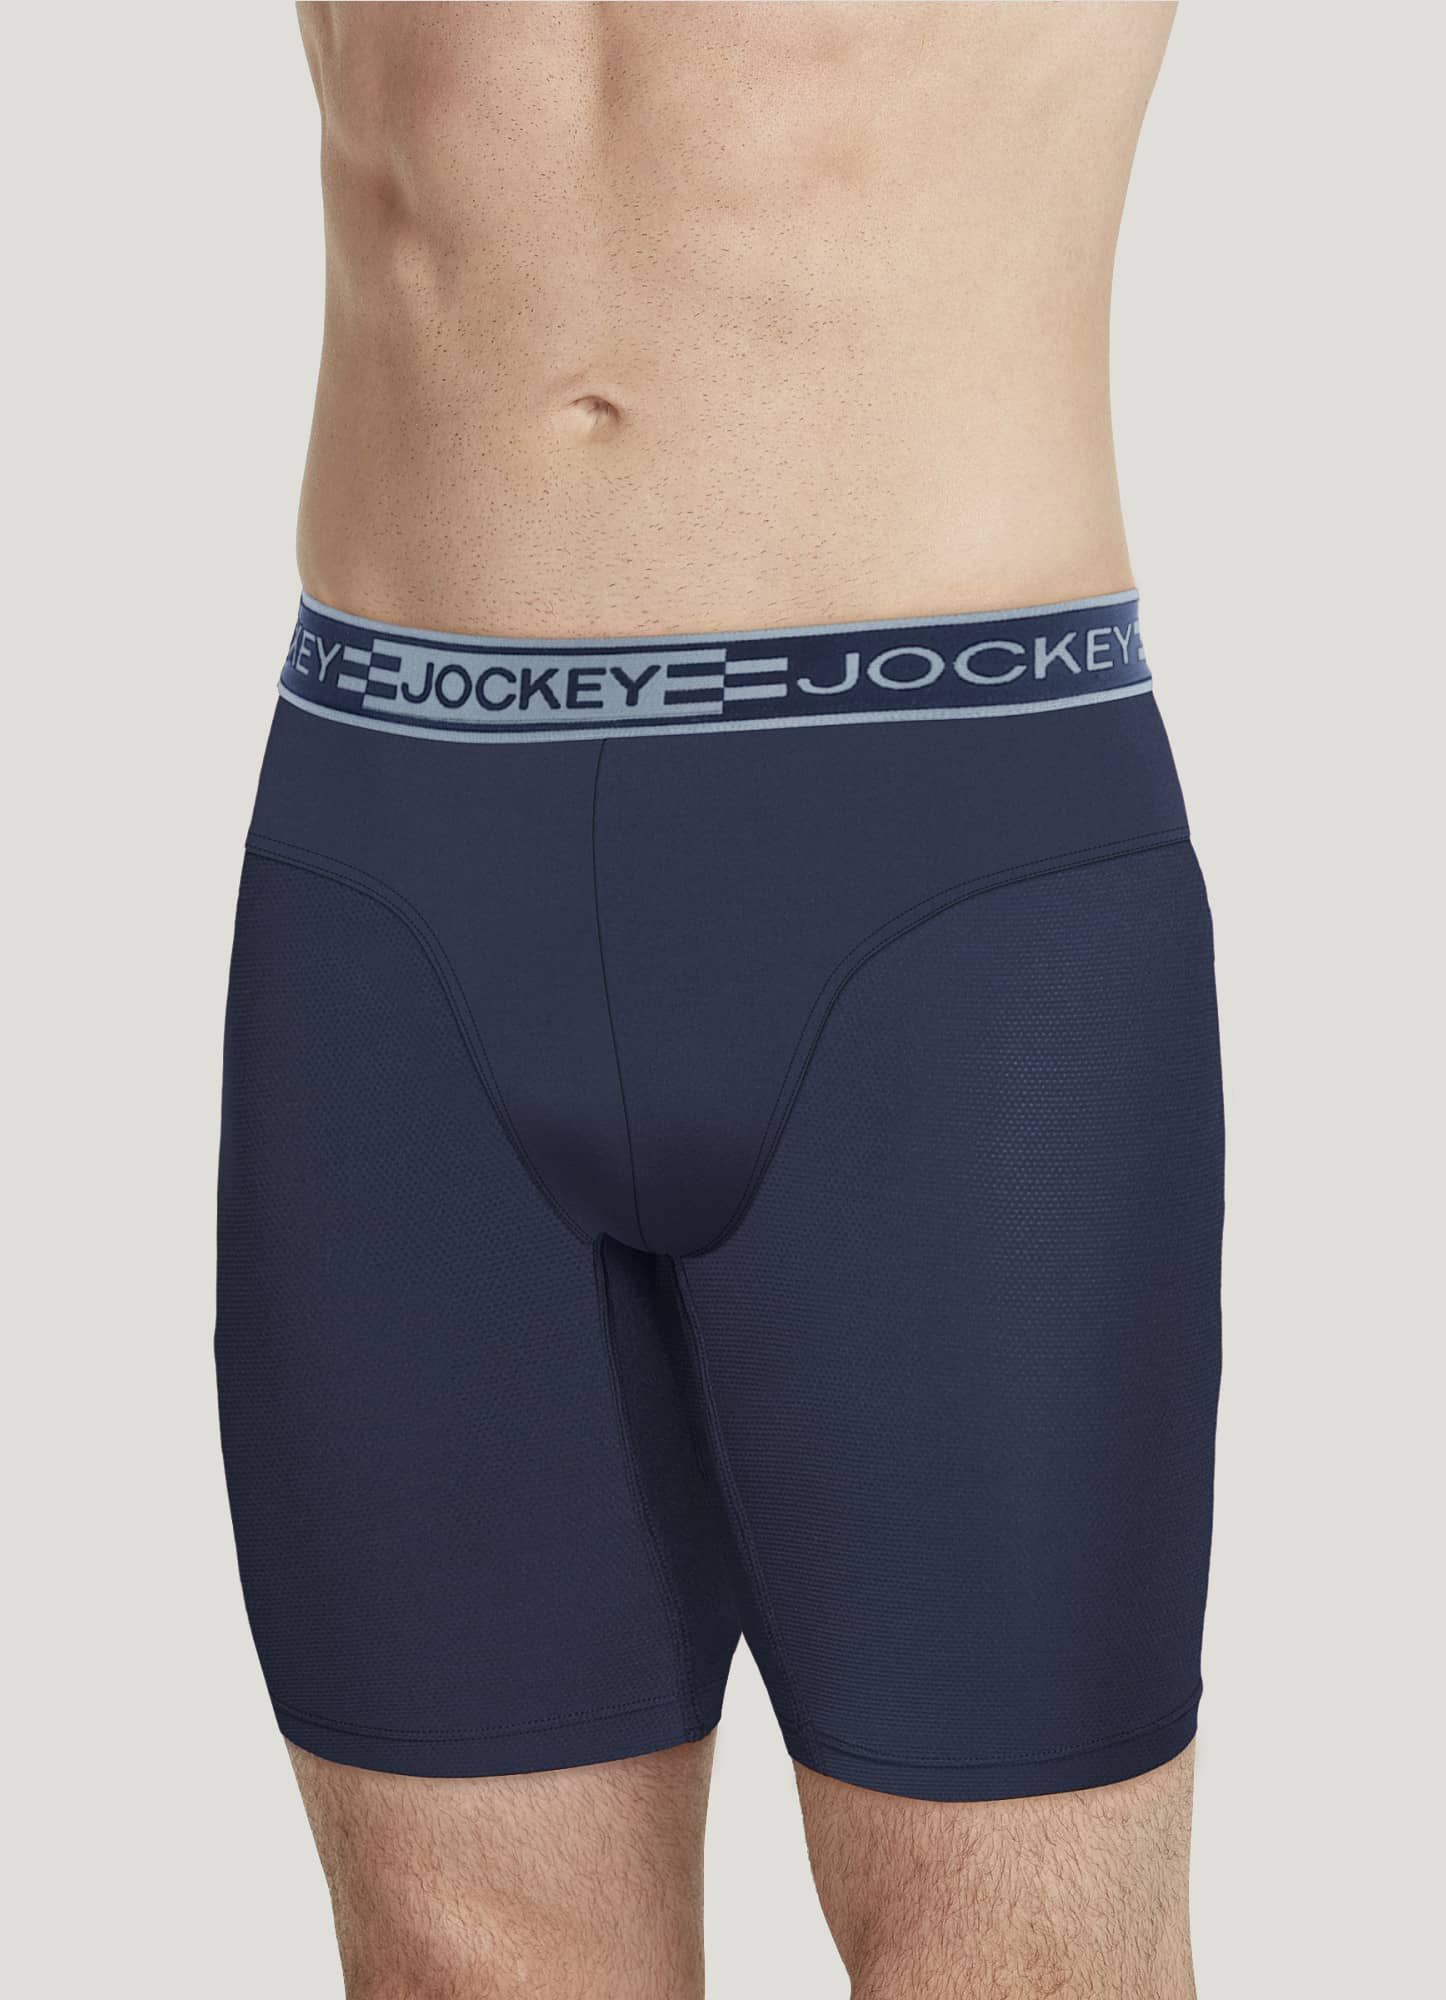 Jockey Sport® Cooling Mesh Performance 9 Midway® Brief